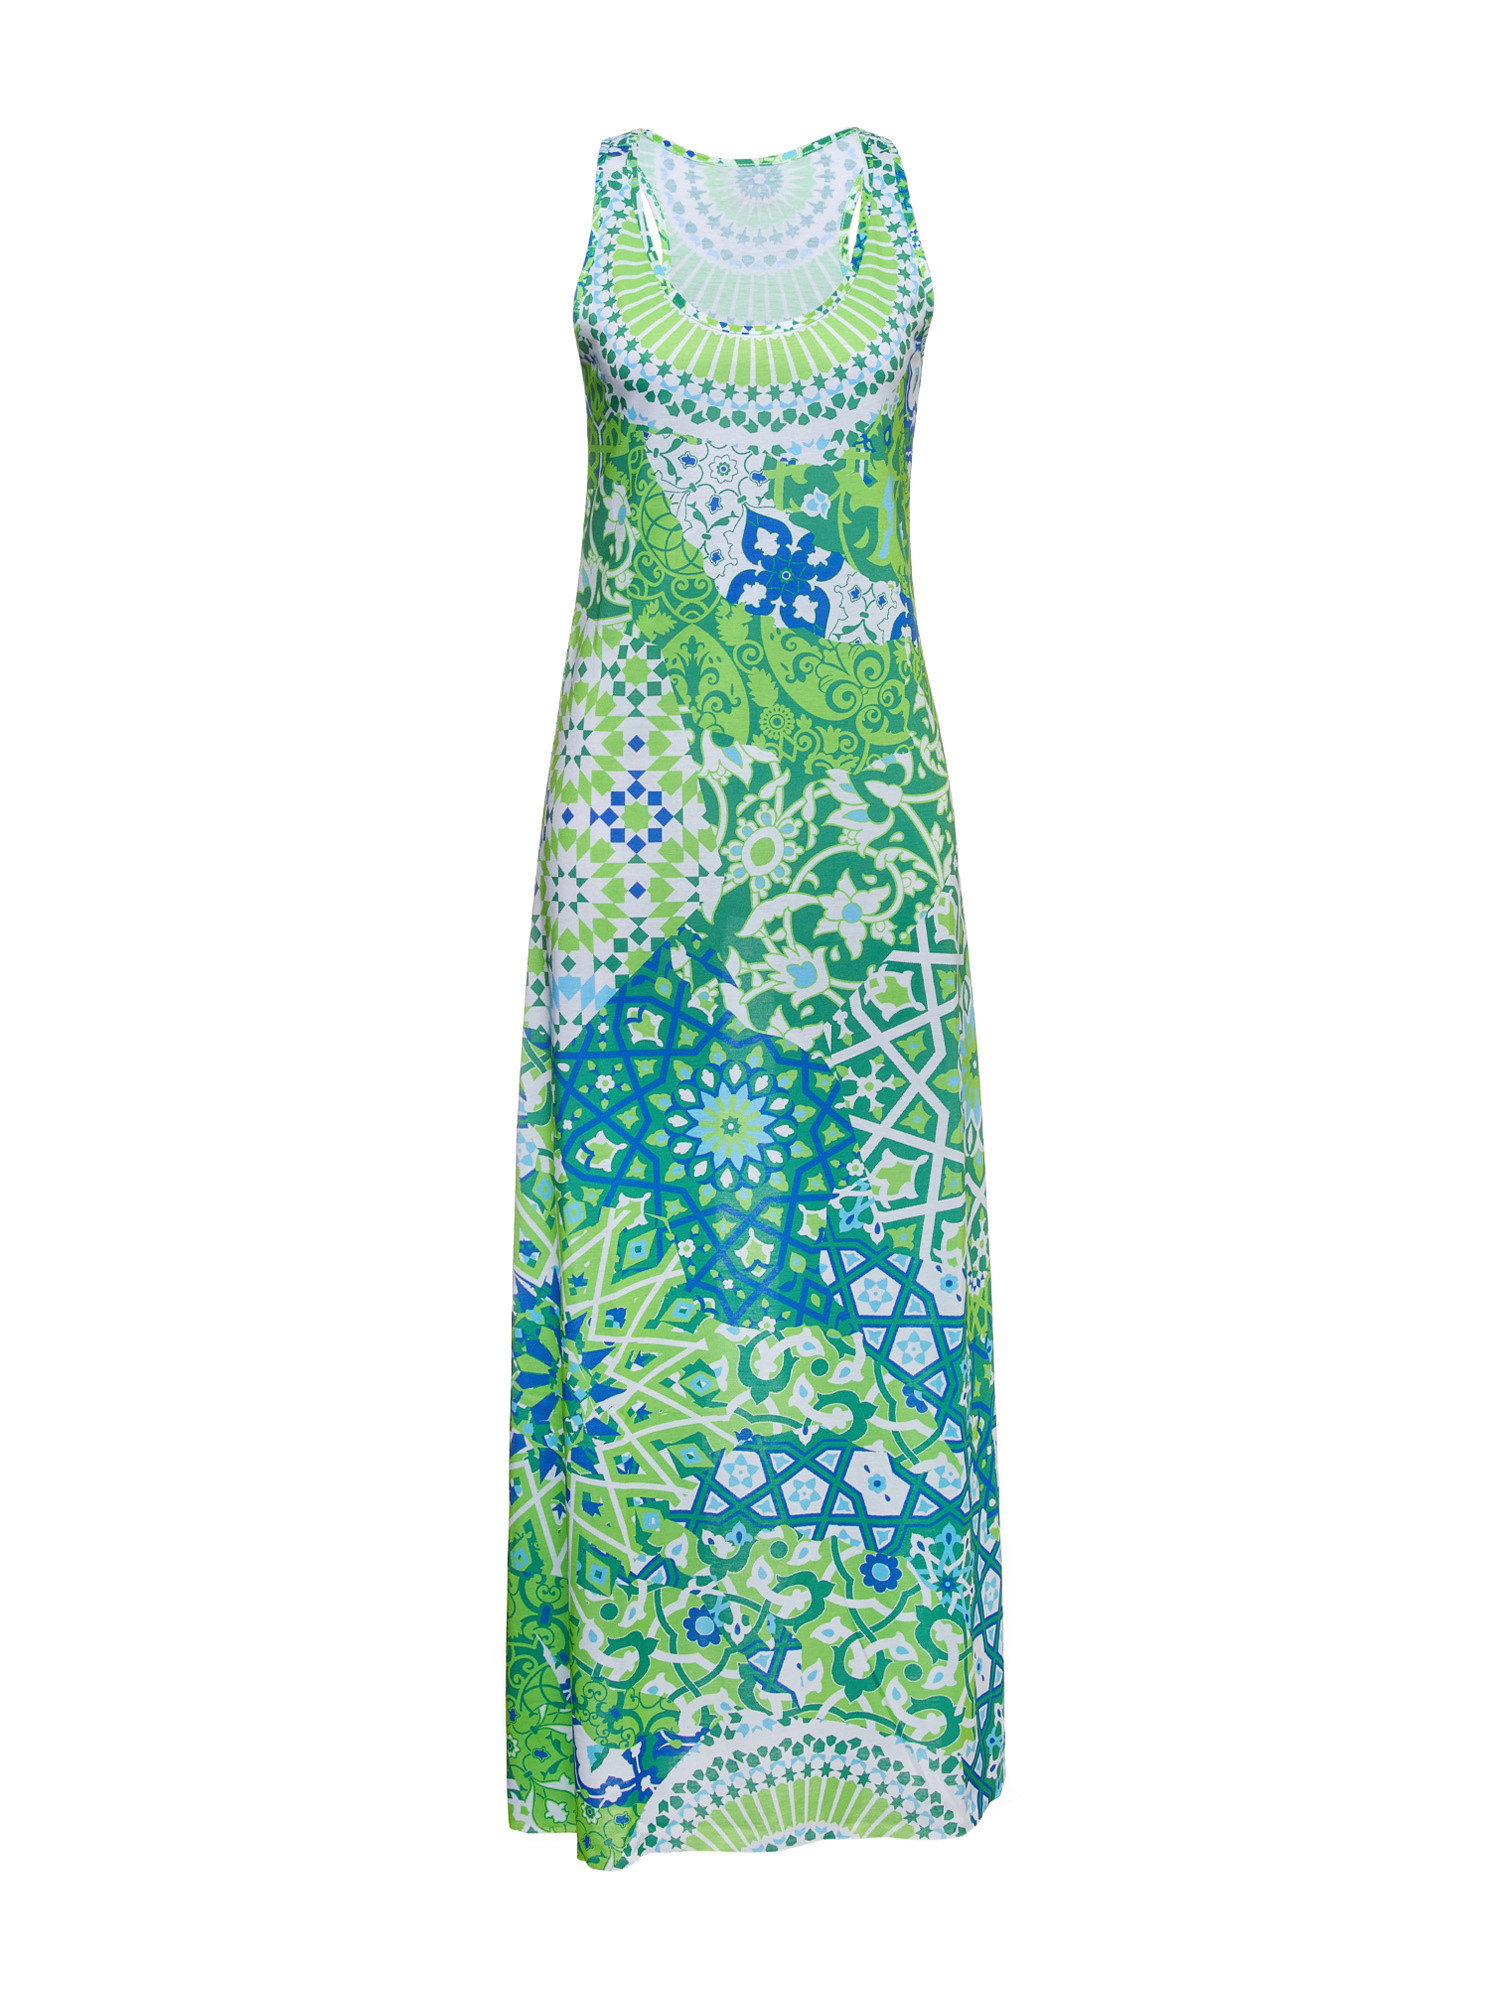 F**K - Long dress with print, Green, large image number 0